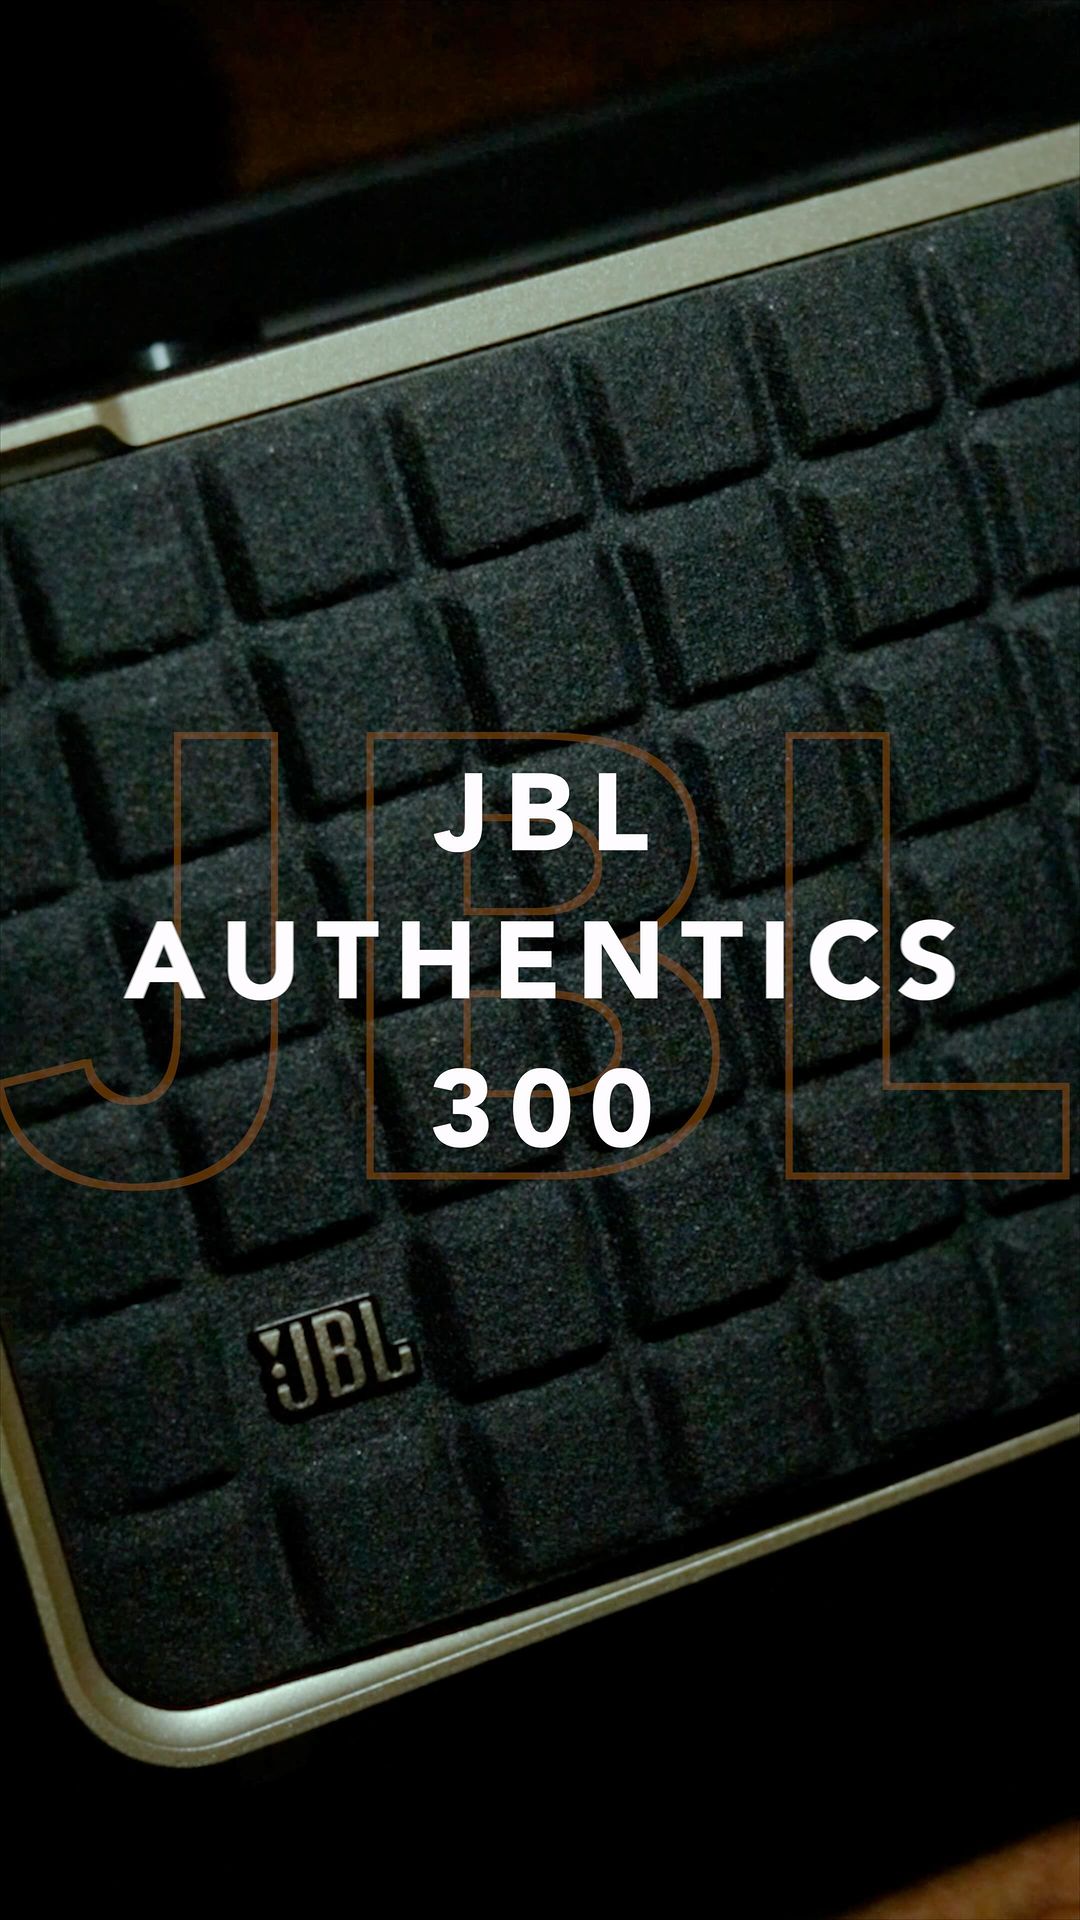 Unboxing the @jblindia Authentics 300 🔊

Stay tuned for our review of these retro modern portable audiophile speakers. ...